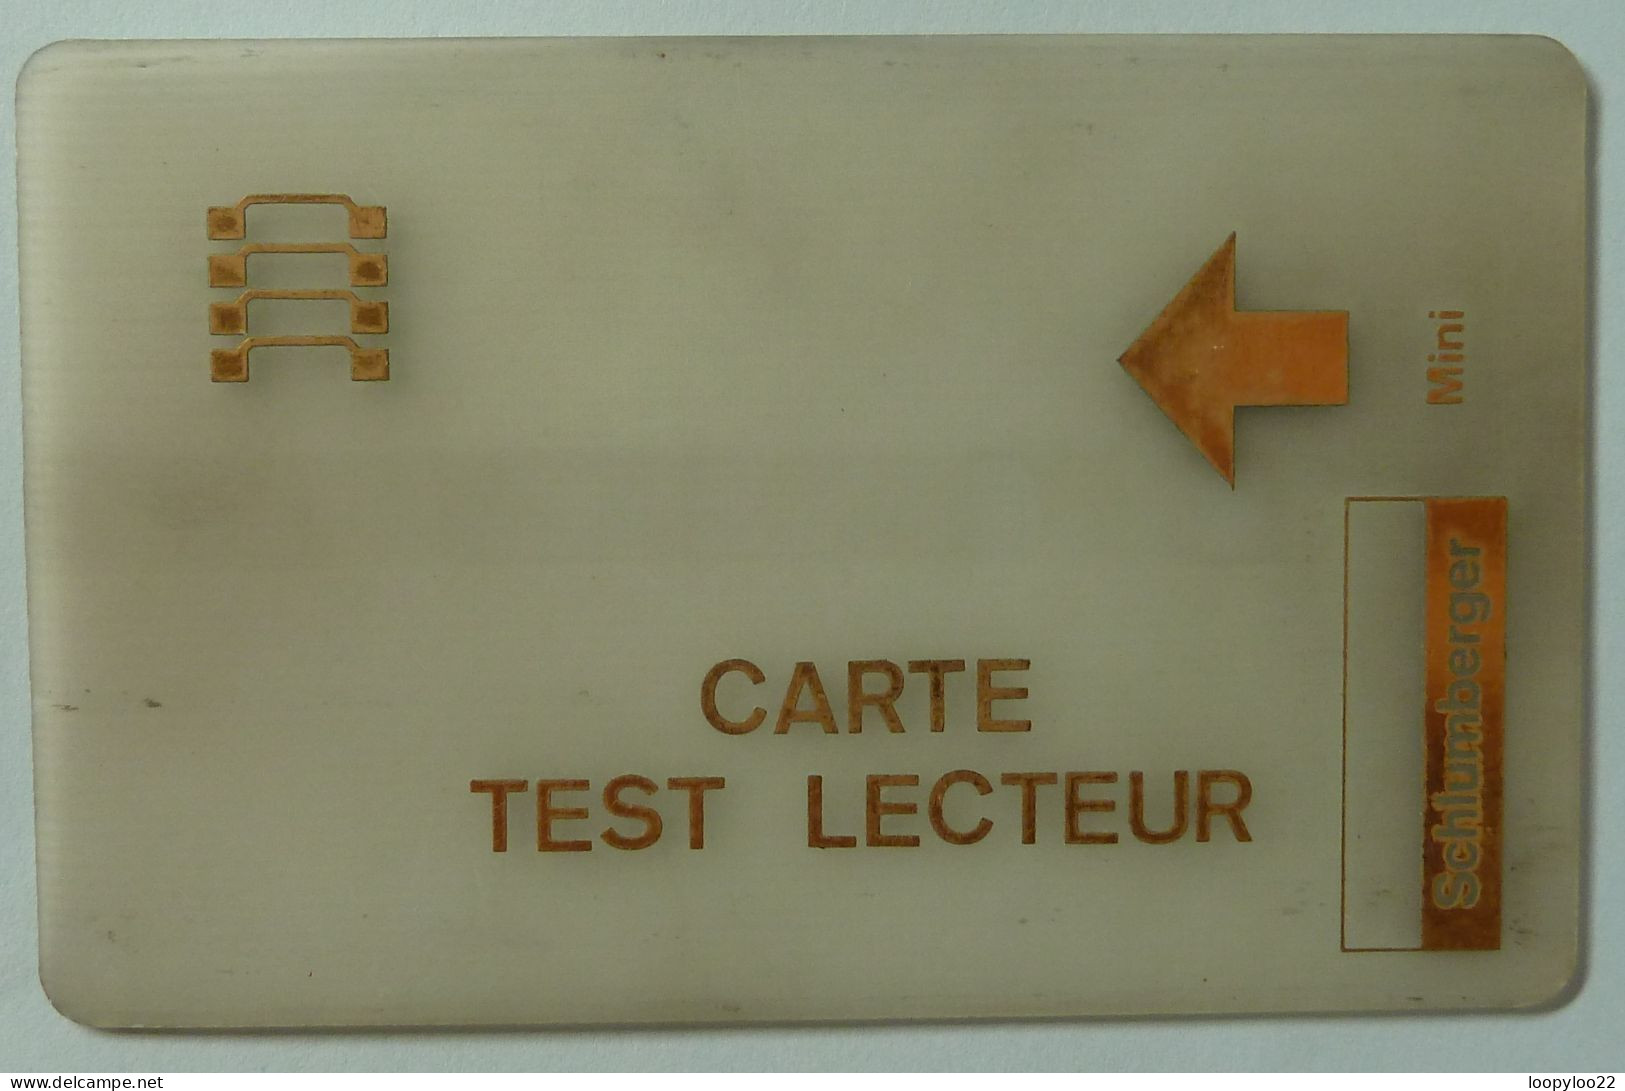 FRANCE - Test For Schlumberger - CARTE TEST LECTEUR - Used For Circuit Testing - R - Non Classés